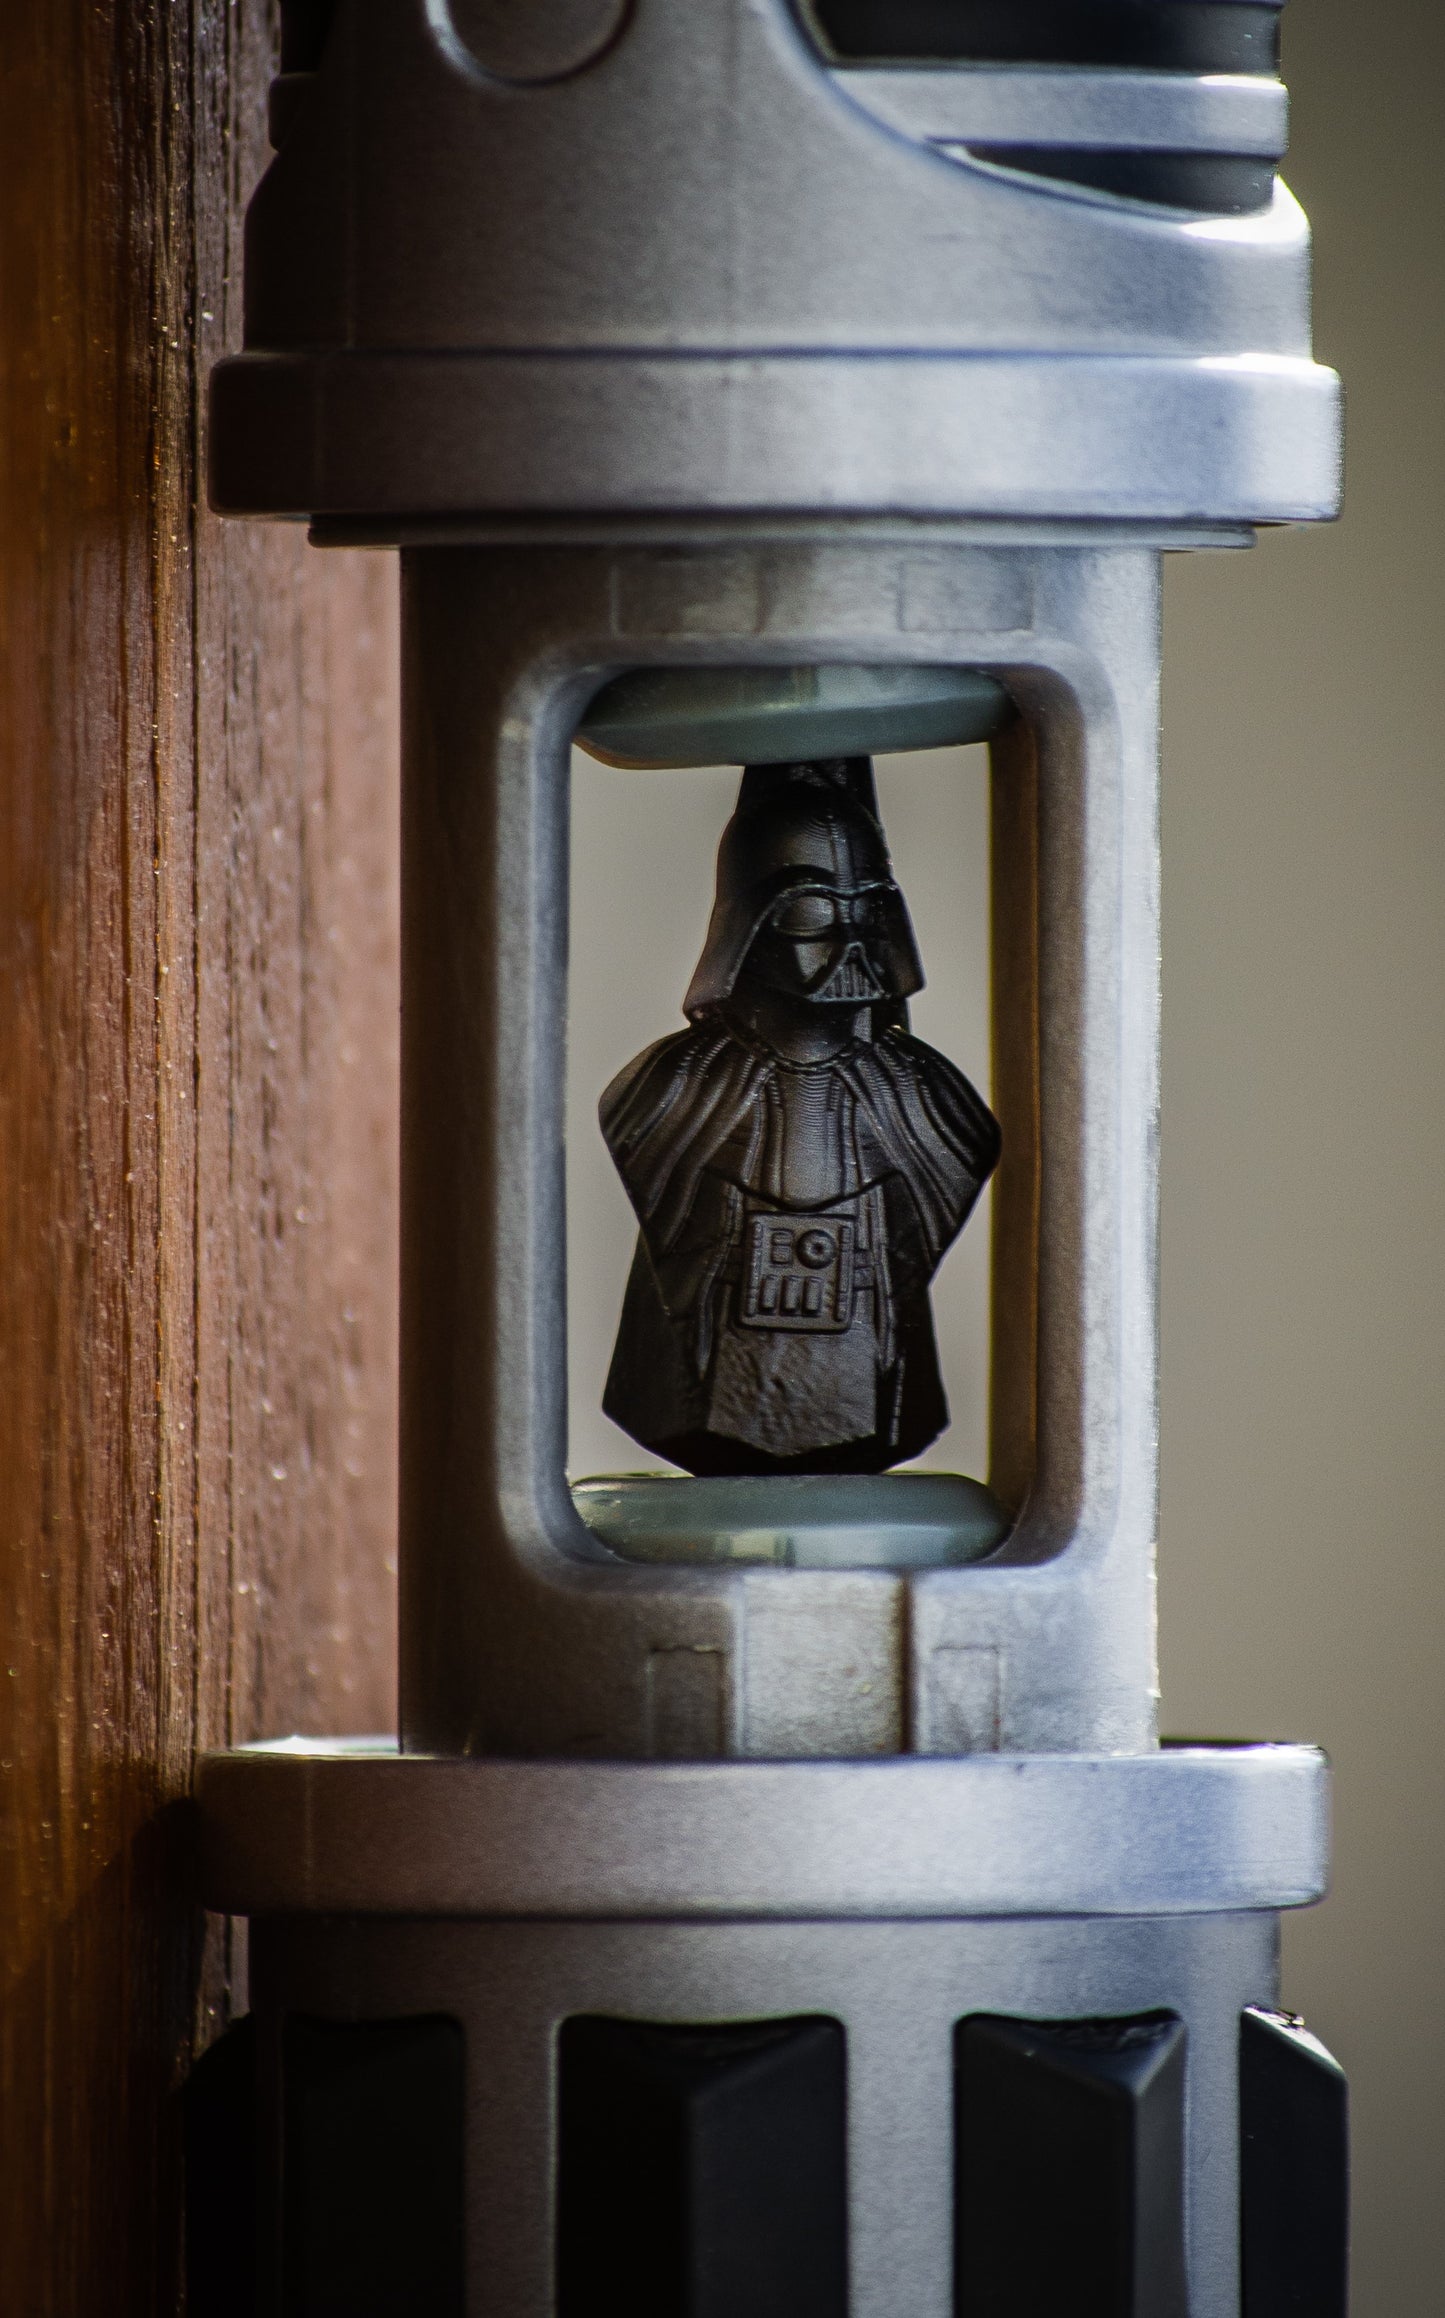 The Vader Crystal